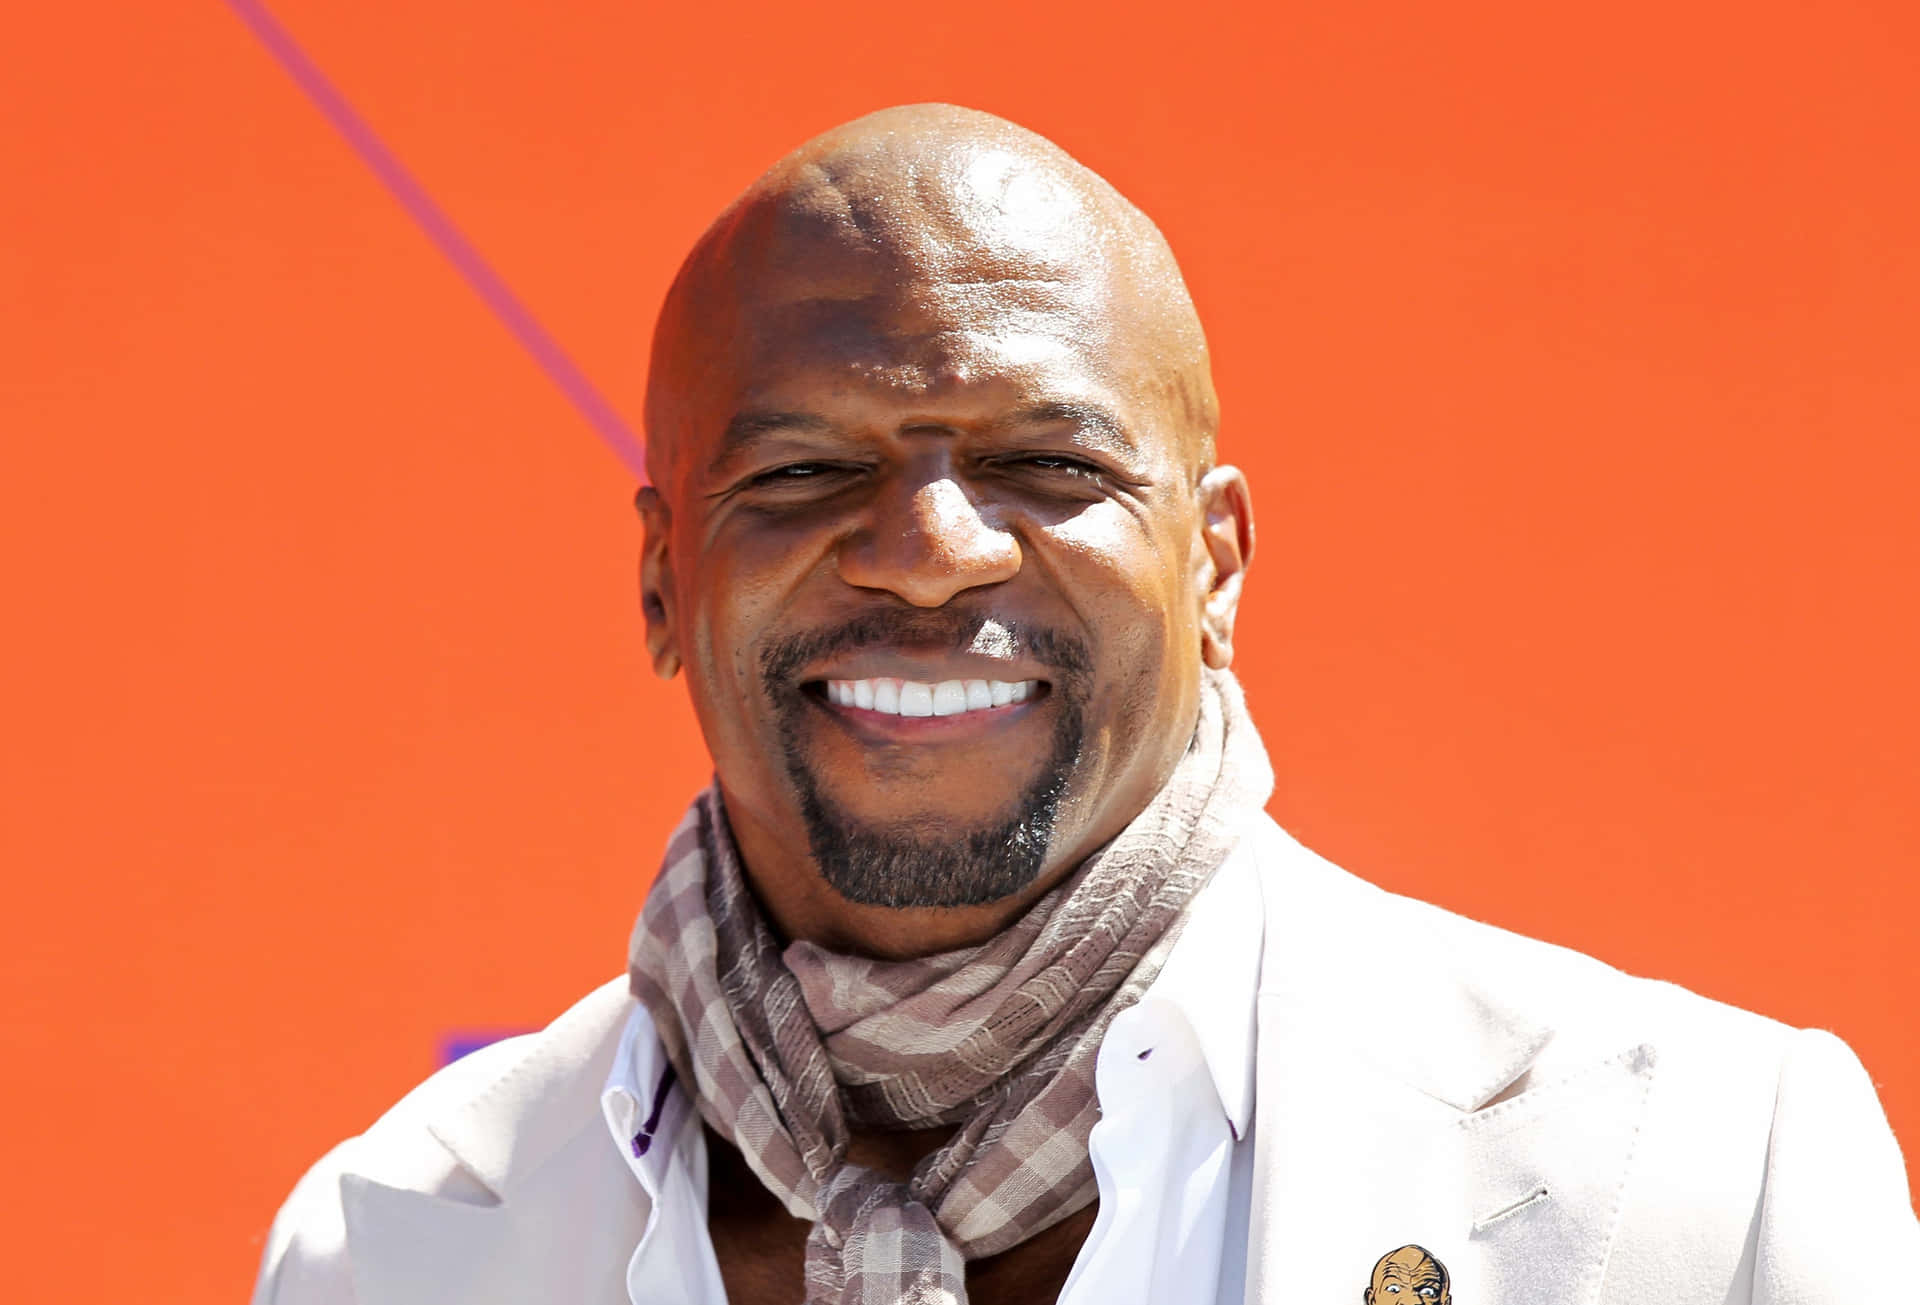 Terry Crews embodies strength and courage. Wallpaper